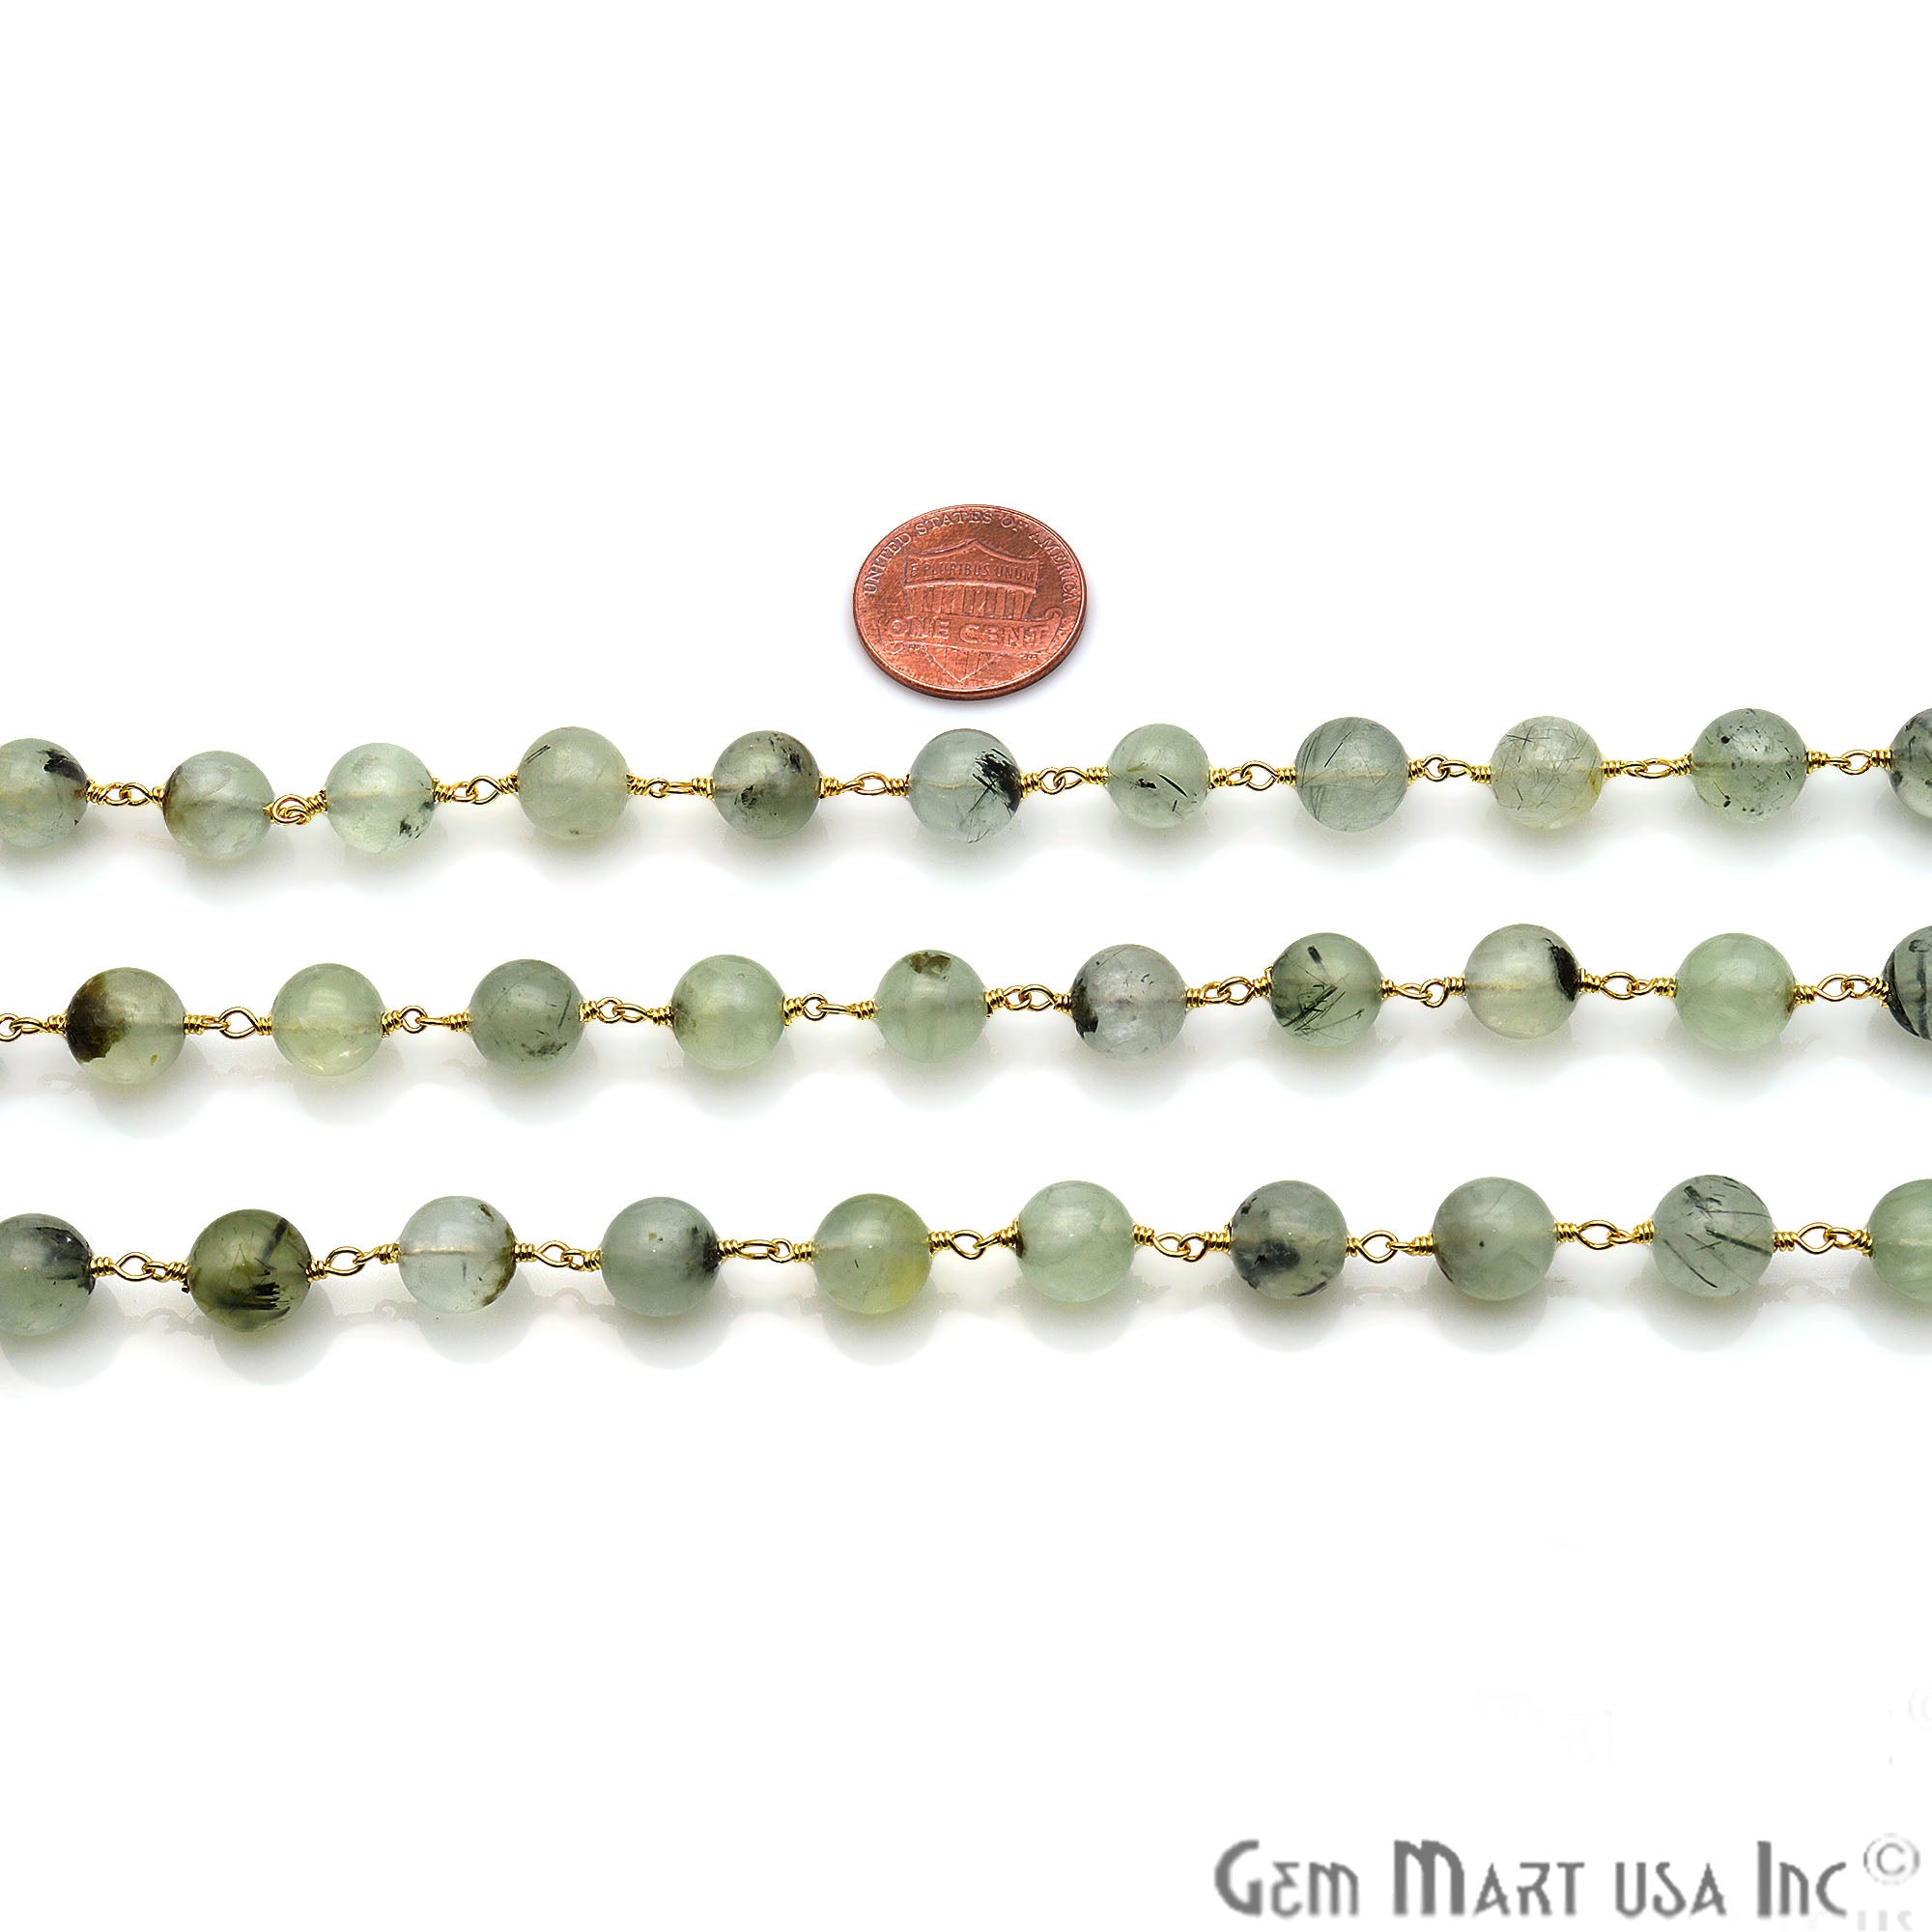 Prehnite Smooth Beads 8mm Gold Plated Wire Wrapped Gemstone Rosary Chain - GemMartUSA